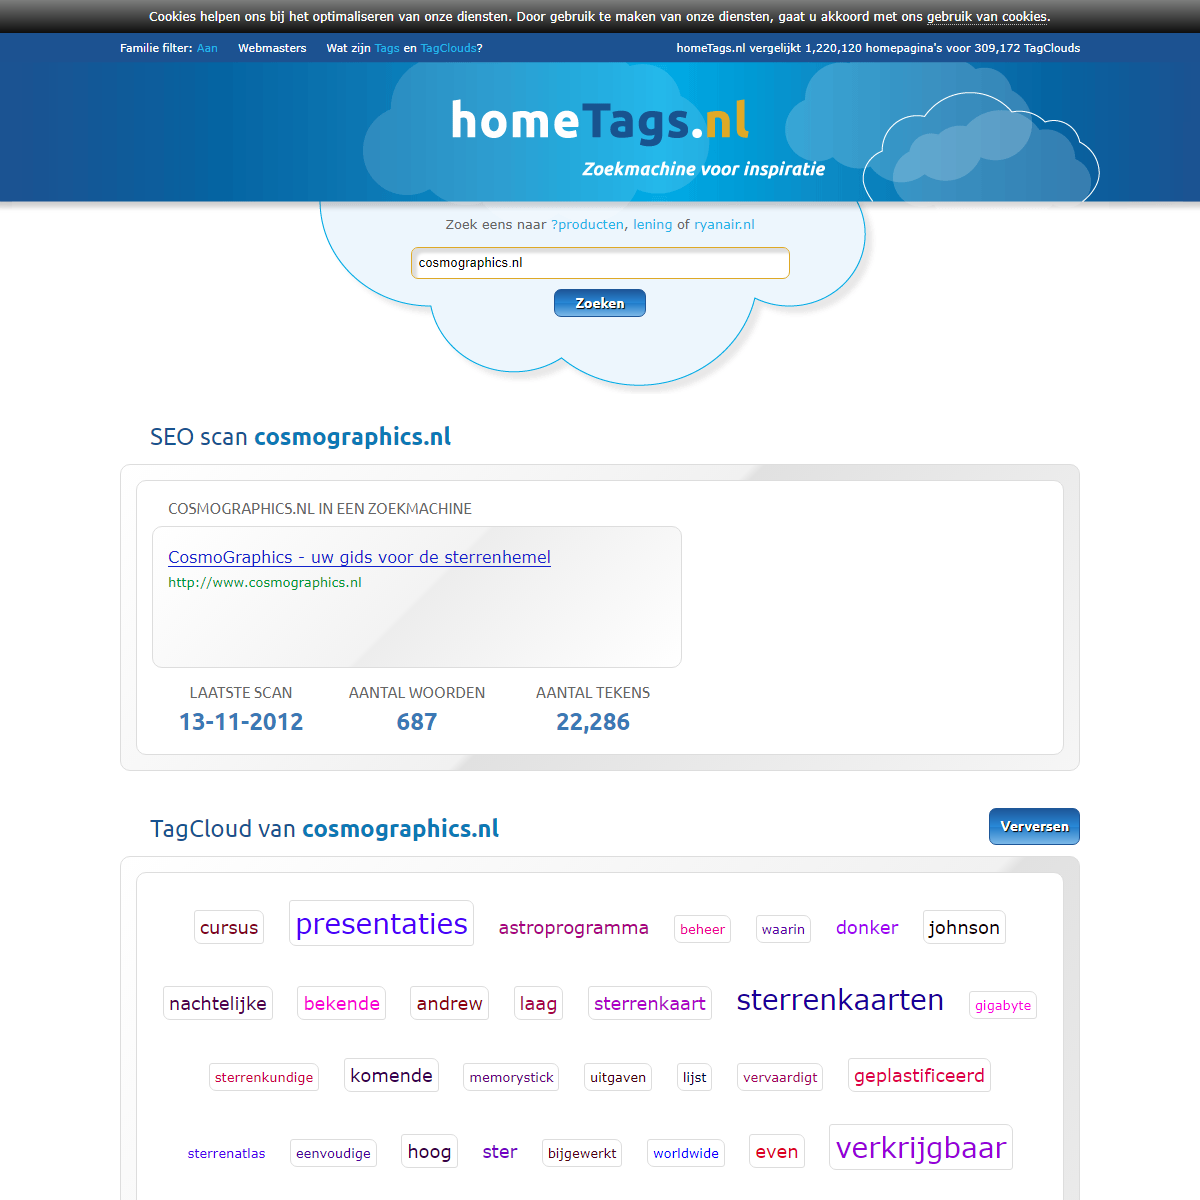 A complete backup of http://www.hometags.nl/analyse/cosmographics.nl